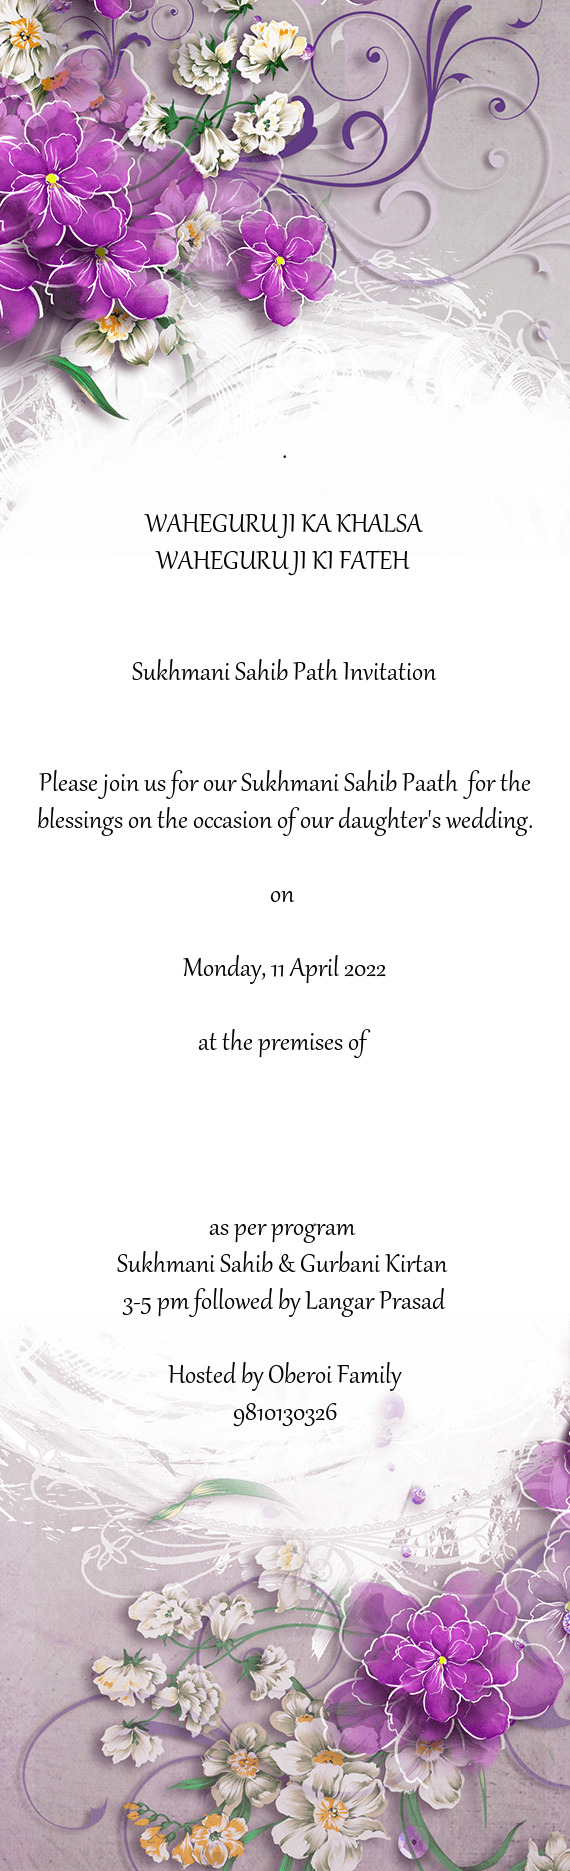 Please join us for our Sukhmani Sahib Paath for the blessings on the occasion of our daughter